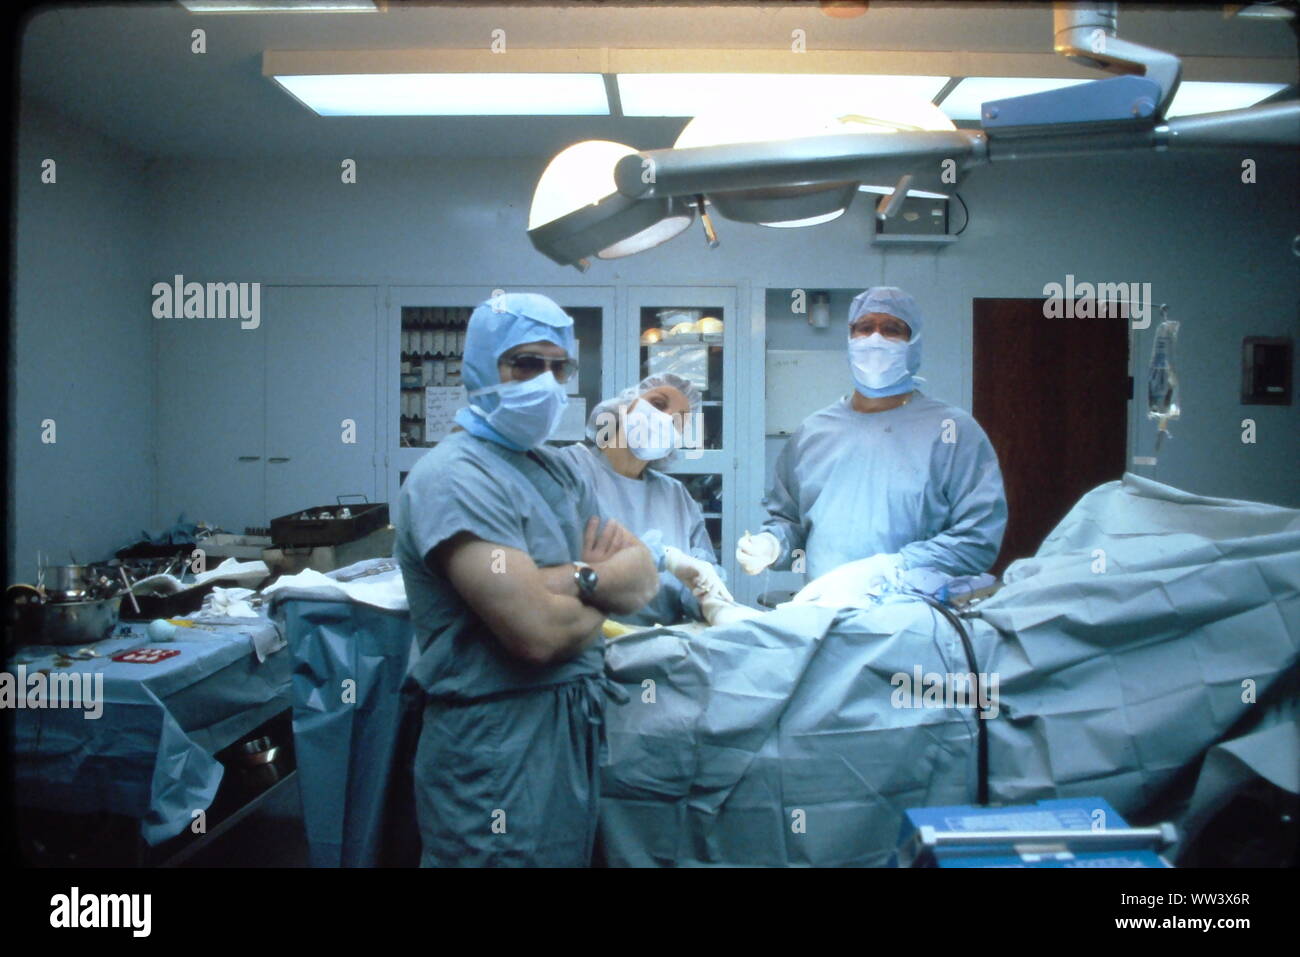 Surgeons performing knee replacement  in sterile surgical scene. Stock Photo